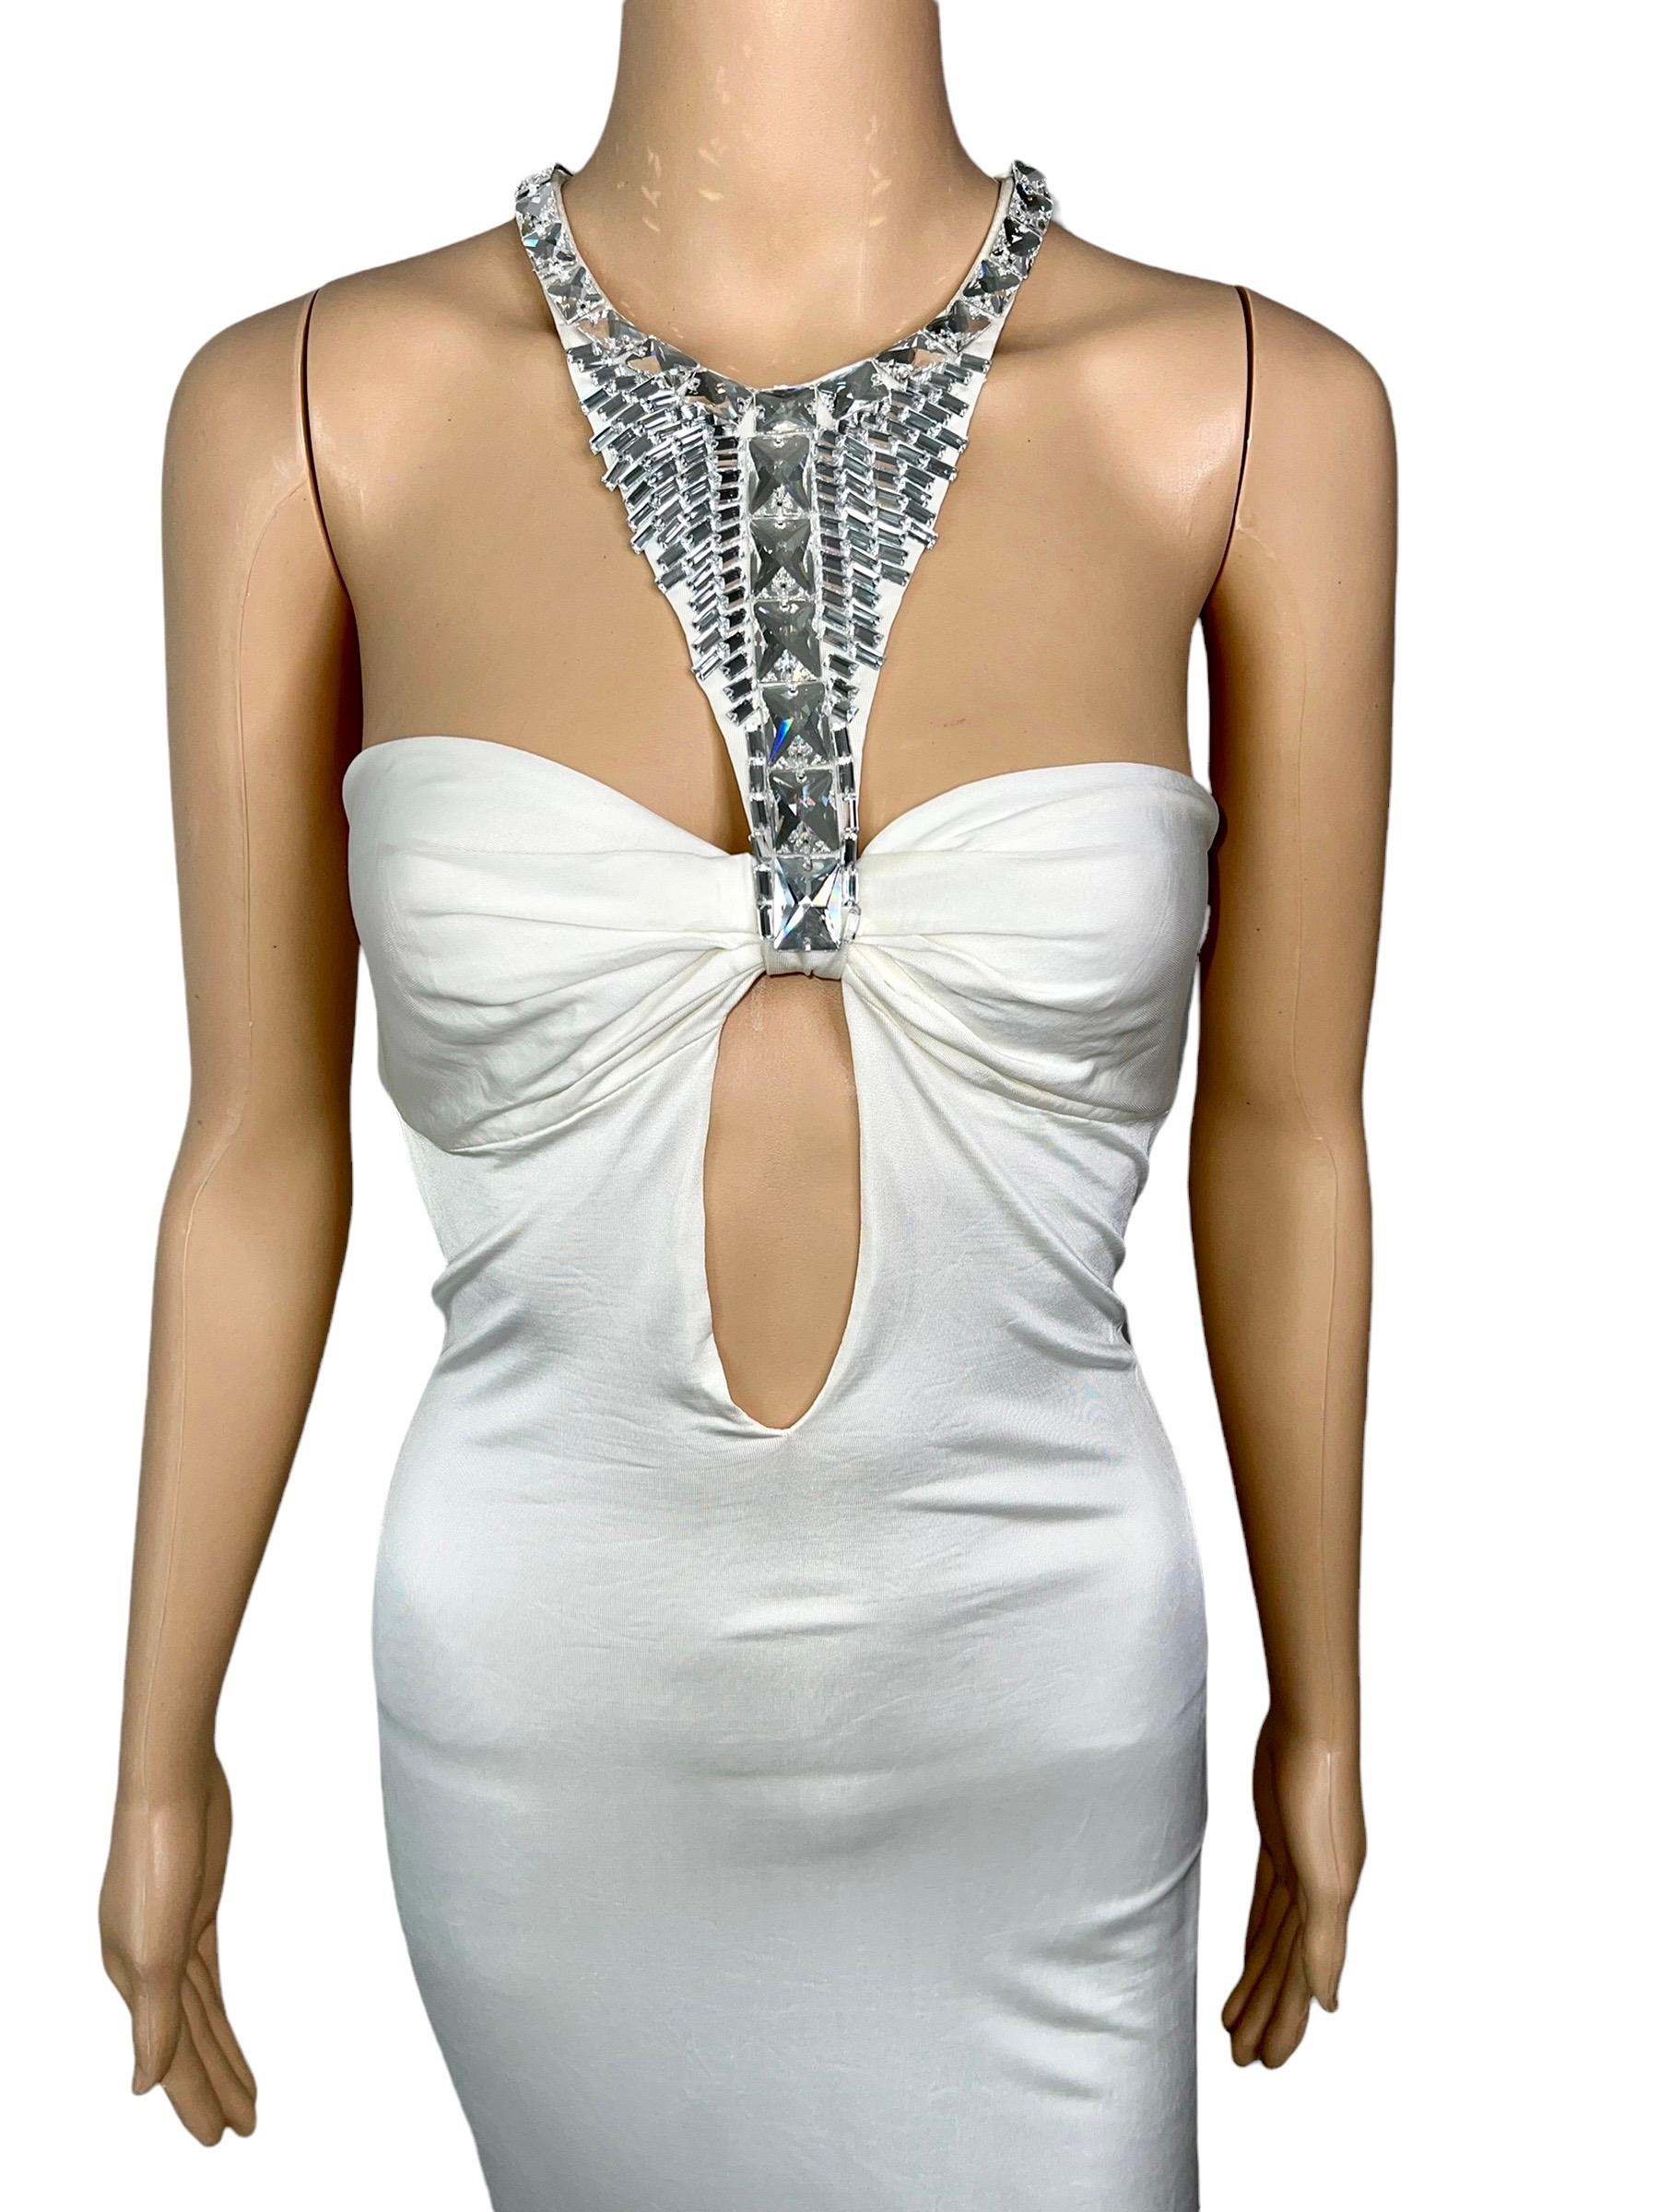 Tom Ford for Gucci F/W 2004 Embellished Plunging Cutout Ivory Evening Dress Gown For Sale 10